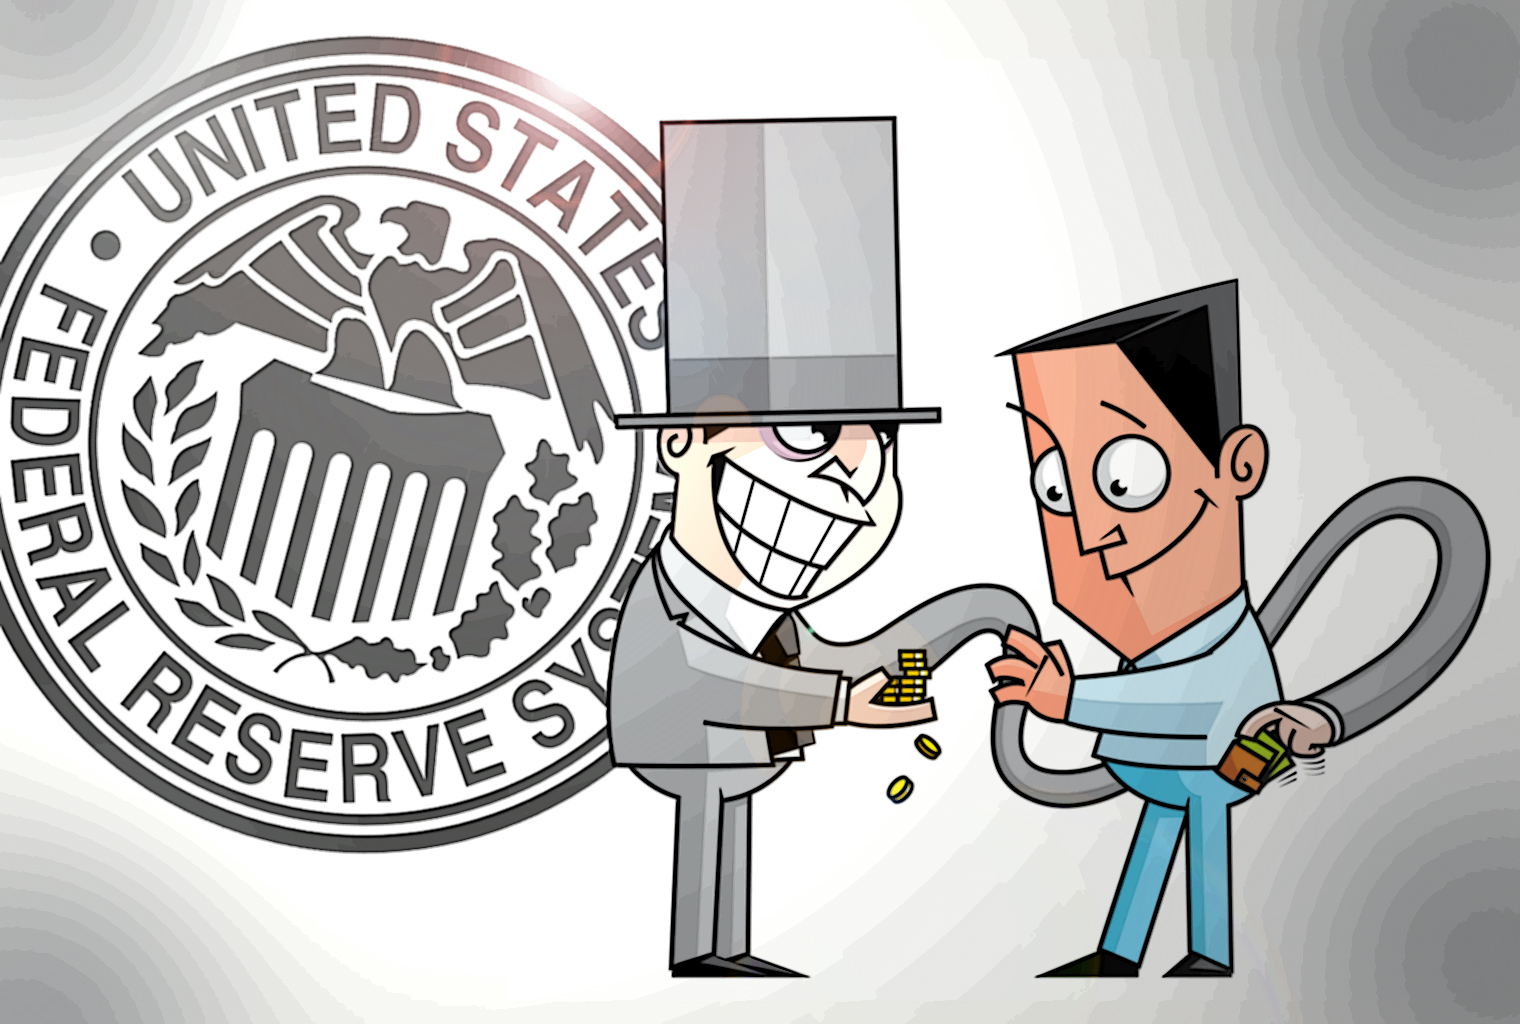 The Fed's Money Creation System Fuels One of the Biggest Heists in History